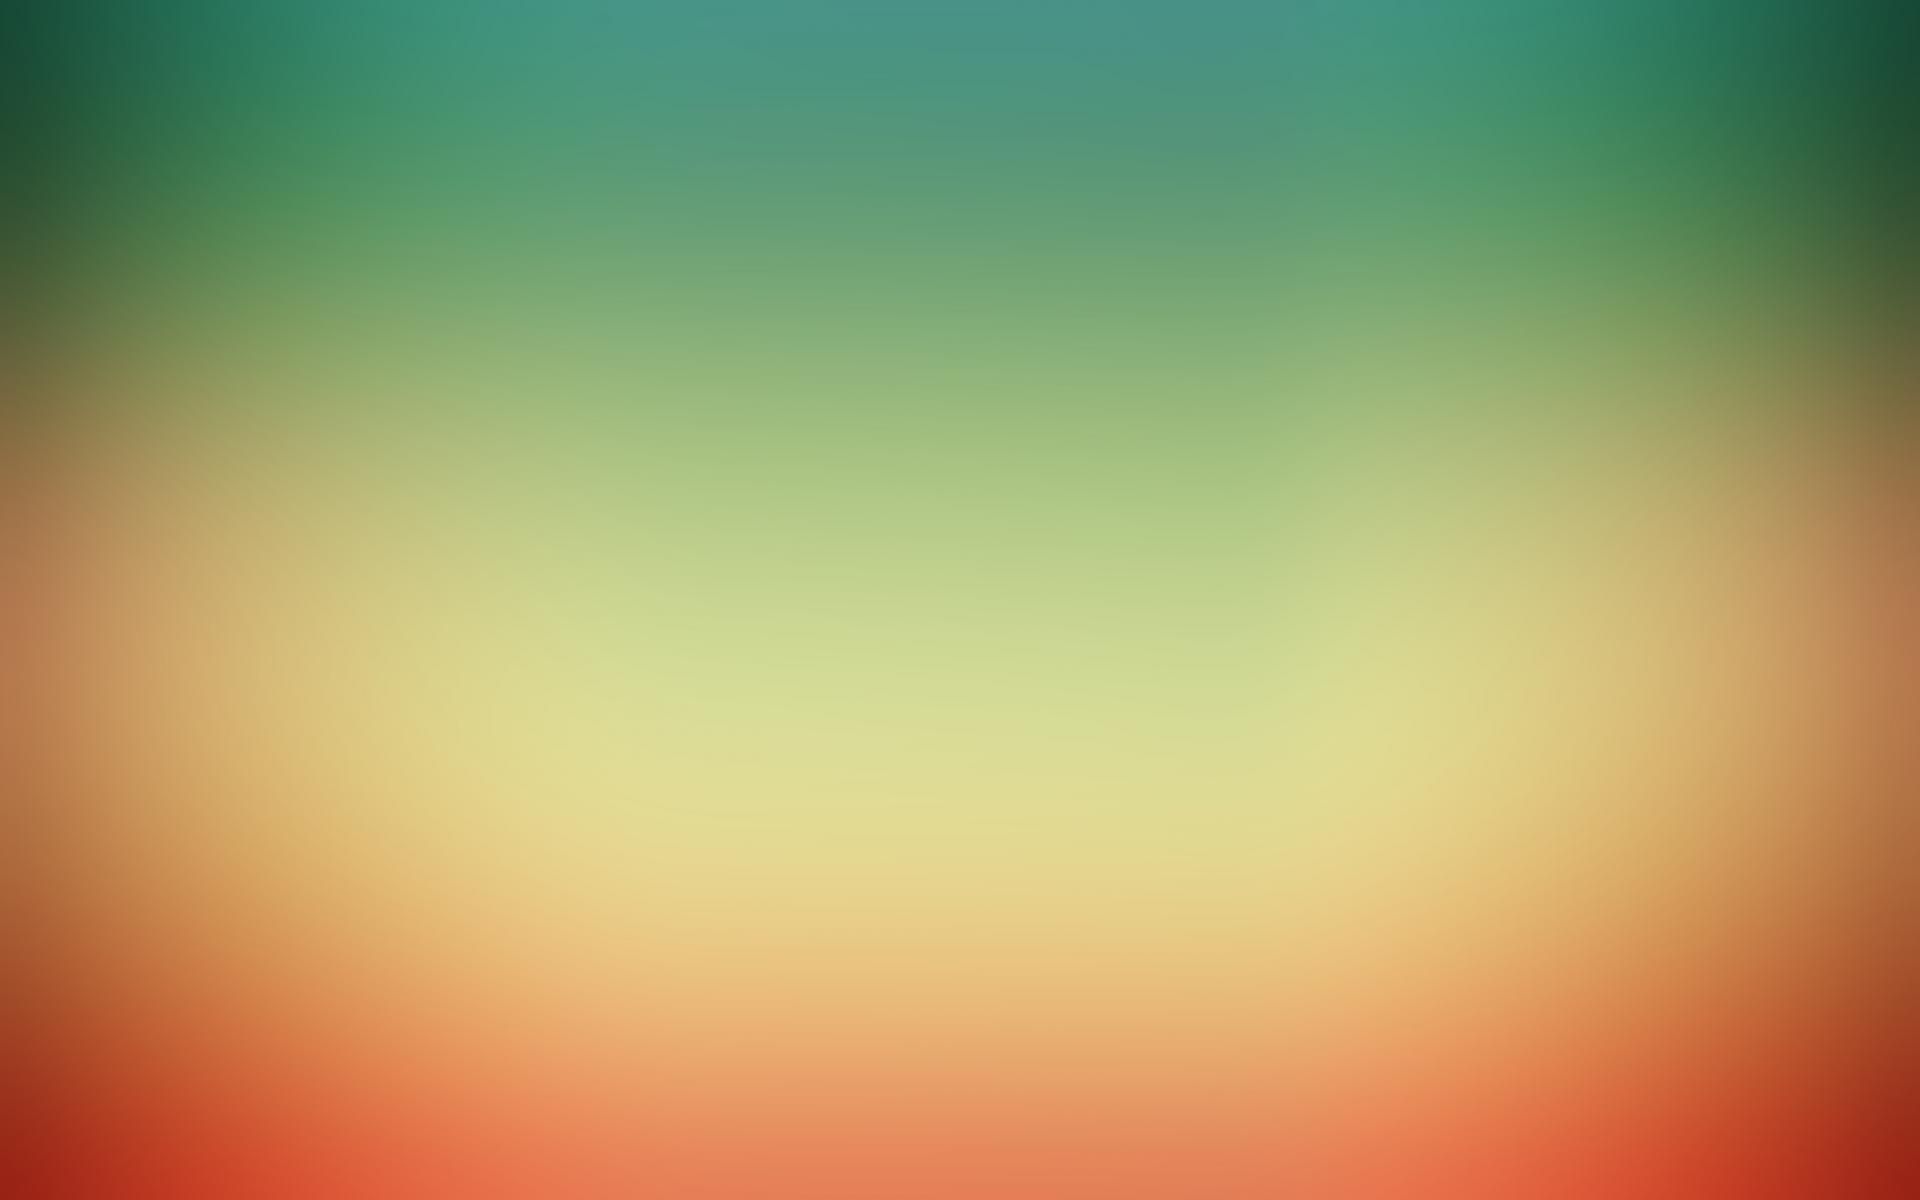 Looking For Good Gradients As A Book Cover Background Divya